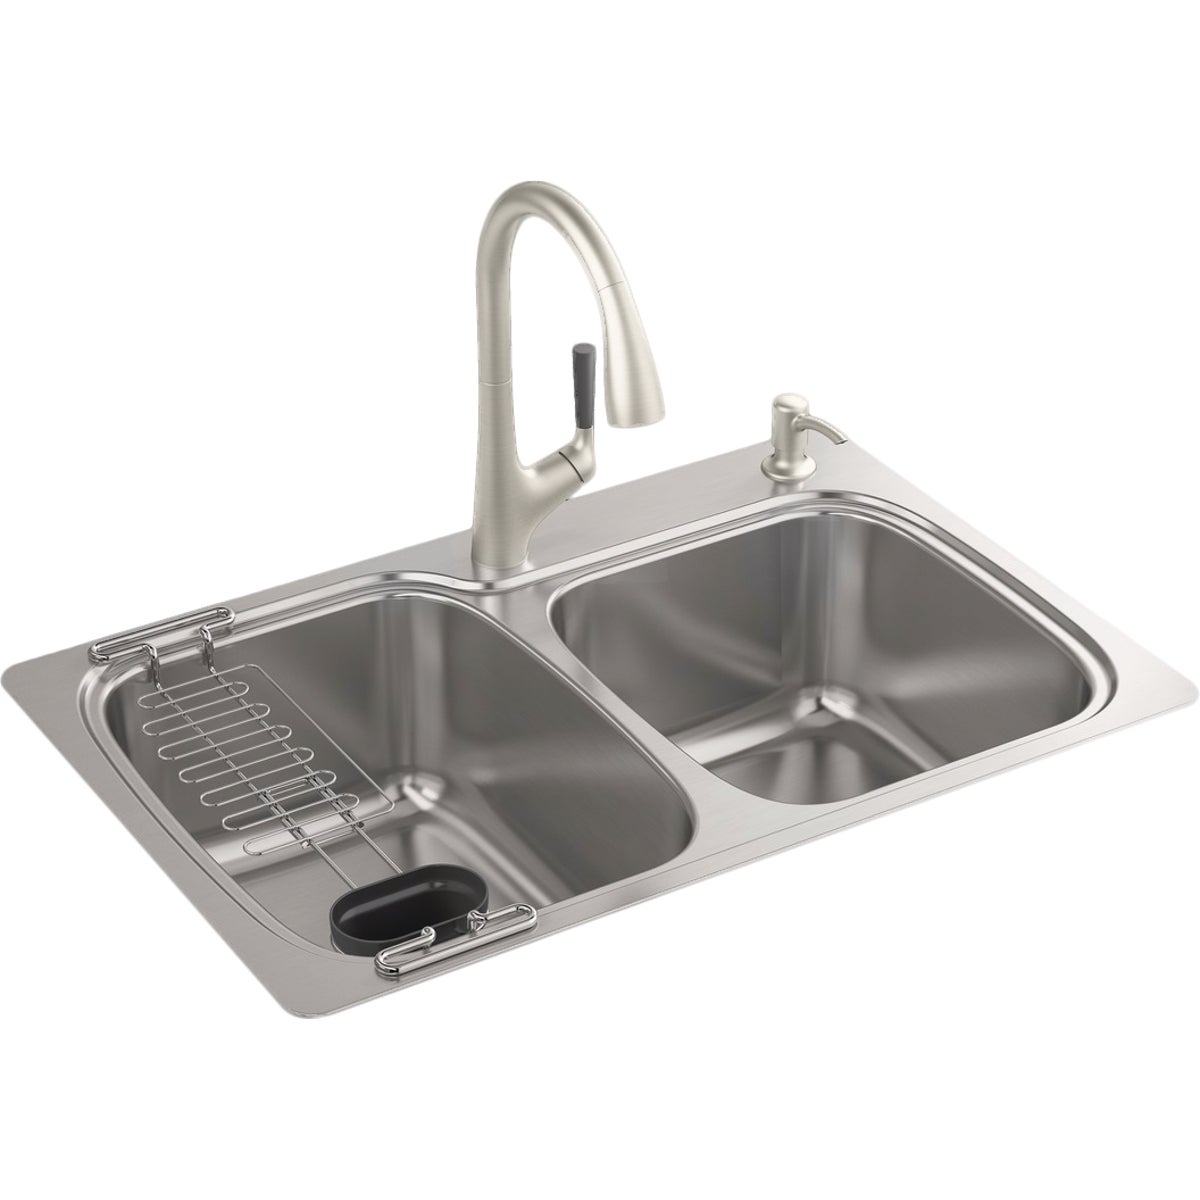 Kohler All-in-One Double Bowl 33 In. x 22 In. x 9 In. Deep Stainless Steel Kitchen Sink Kit, Top/Under Mount